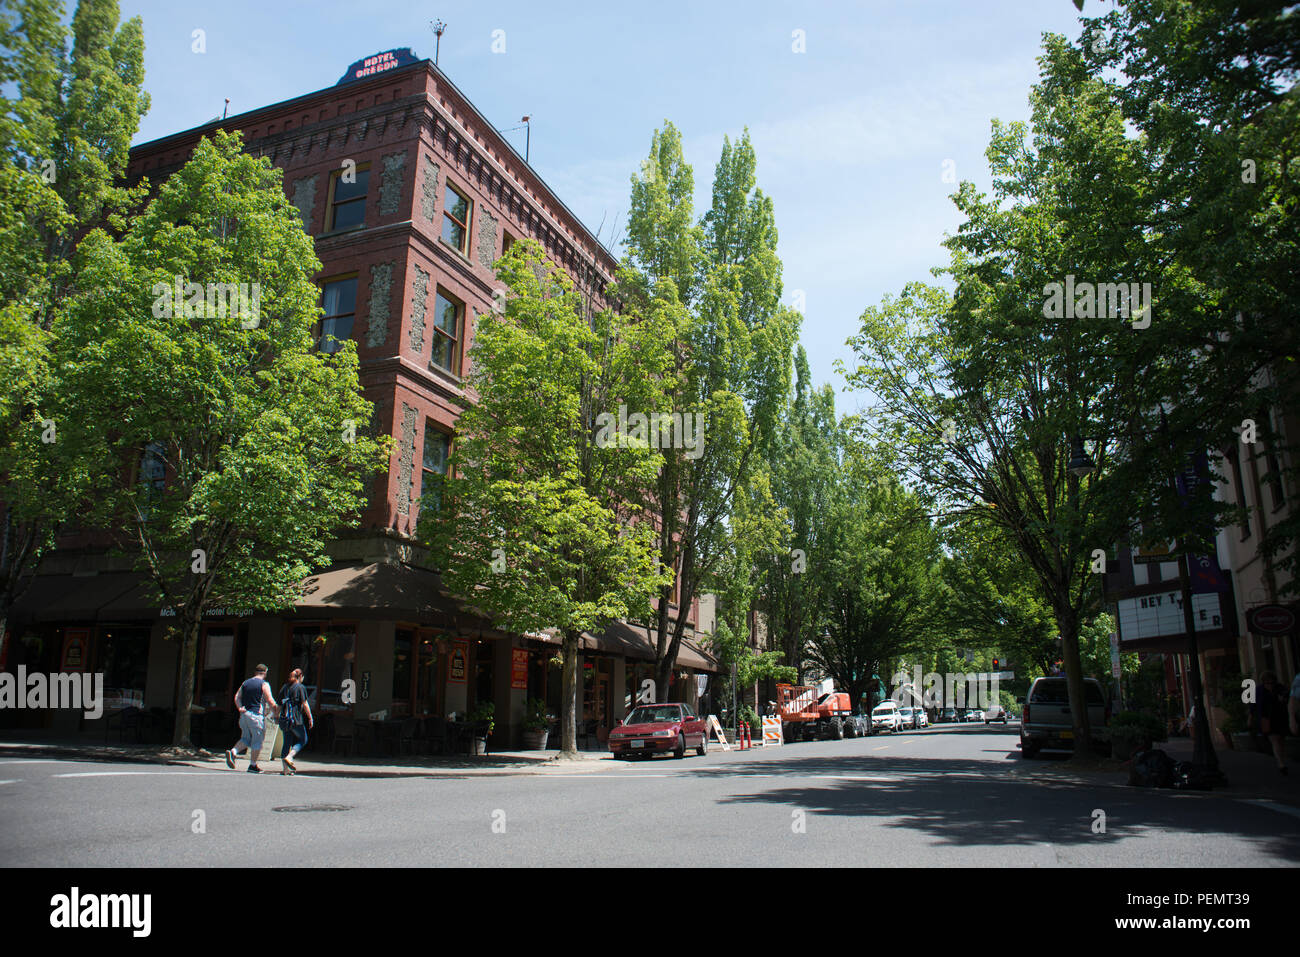 MCMINNVILLE, OREGON JUNE 6TH 2017, the McMenamins Hotel Oregon, and other buildings along downtown 3rd street. Stock Photo